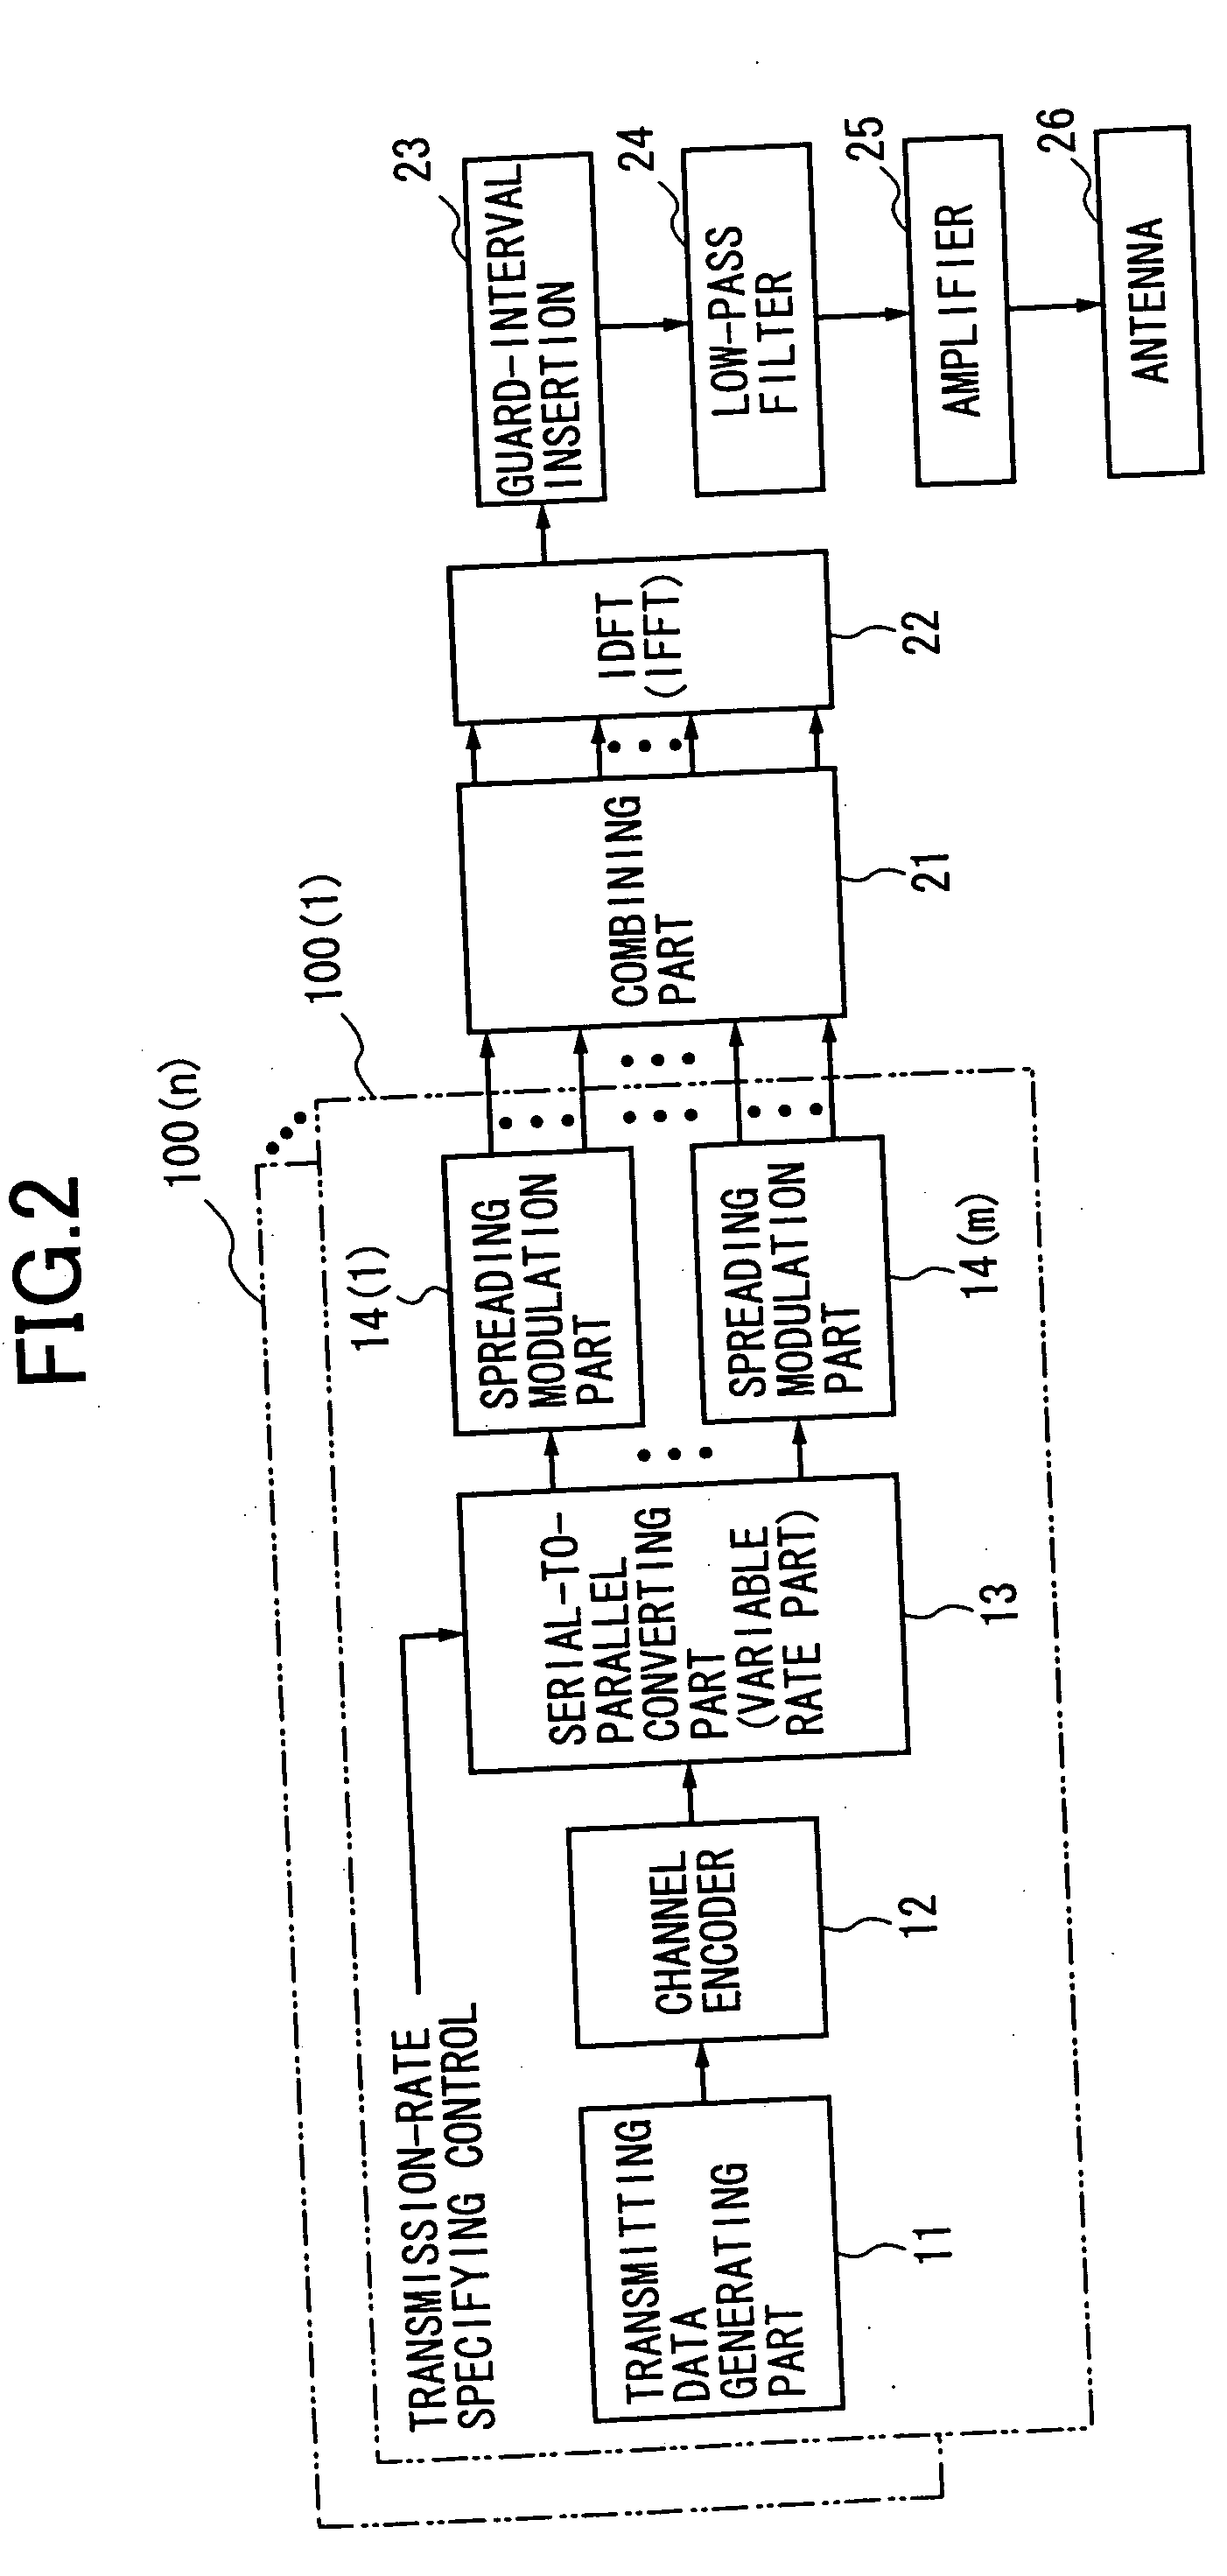 Multi-carrier CDMA radio transmitting method and apparatus, and channel estimation method and apparatus for multi-carrier CDMA radio transmitting system